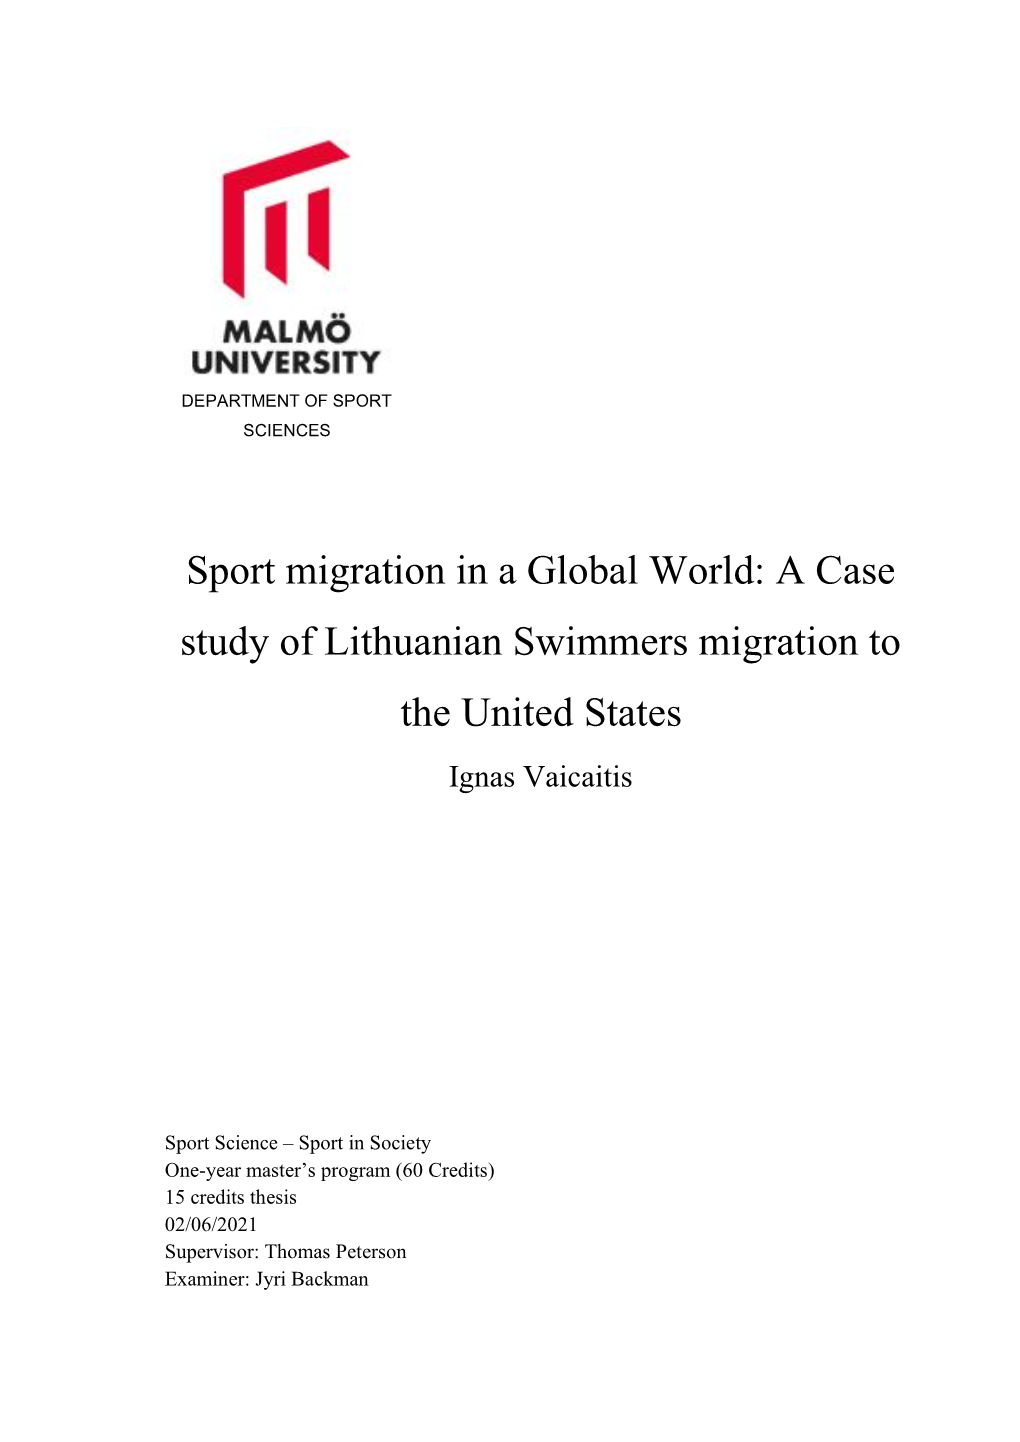 A Case Study of Lithuanian Swimmers Migration to the United States Ignas Vaicaitis